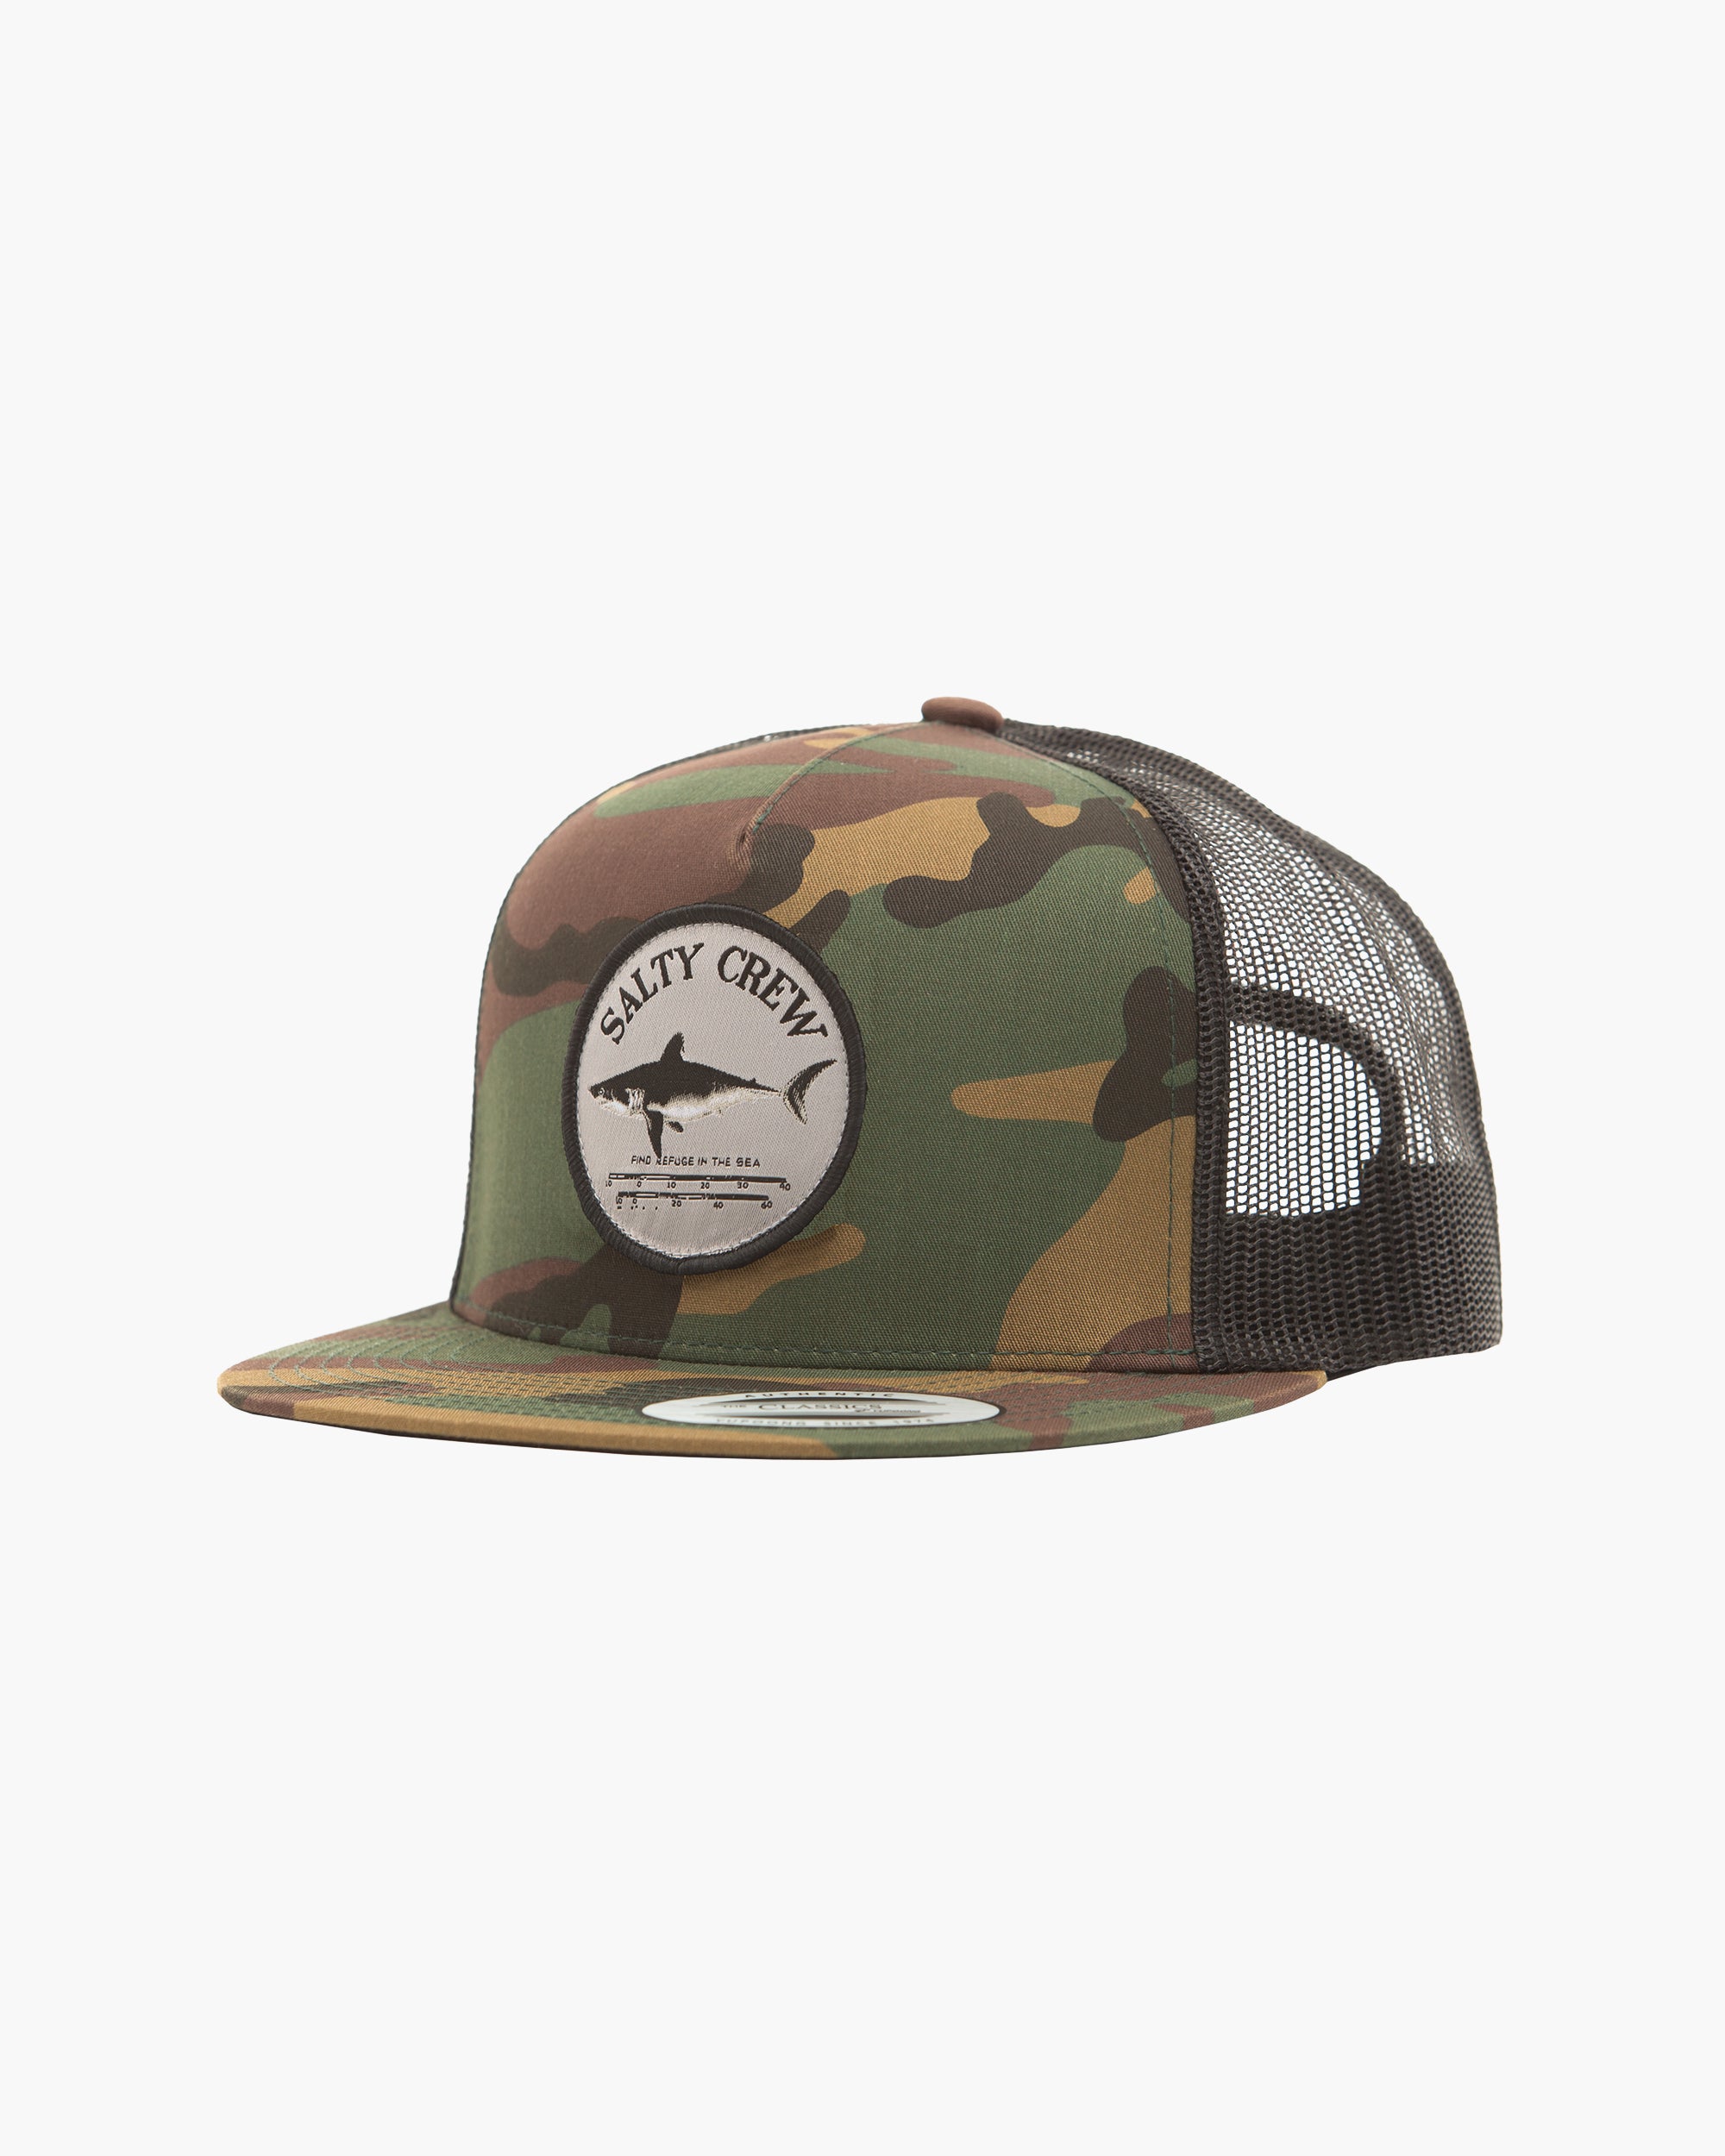 Late for Work Camo Hat - Crewel and Unusual